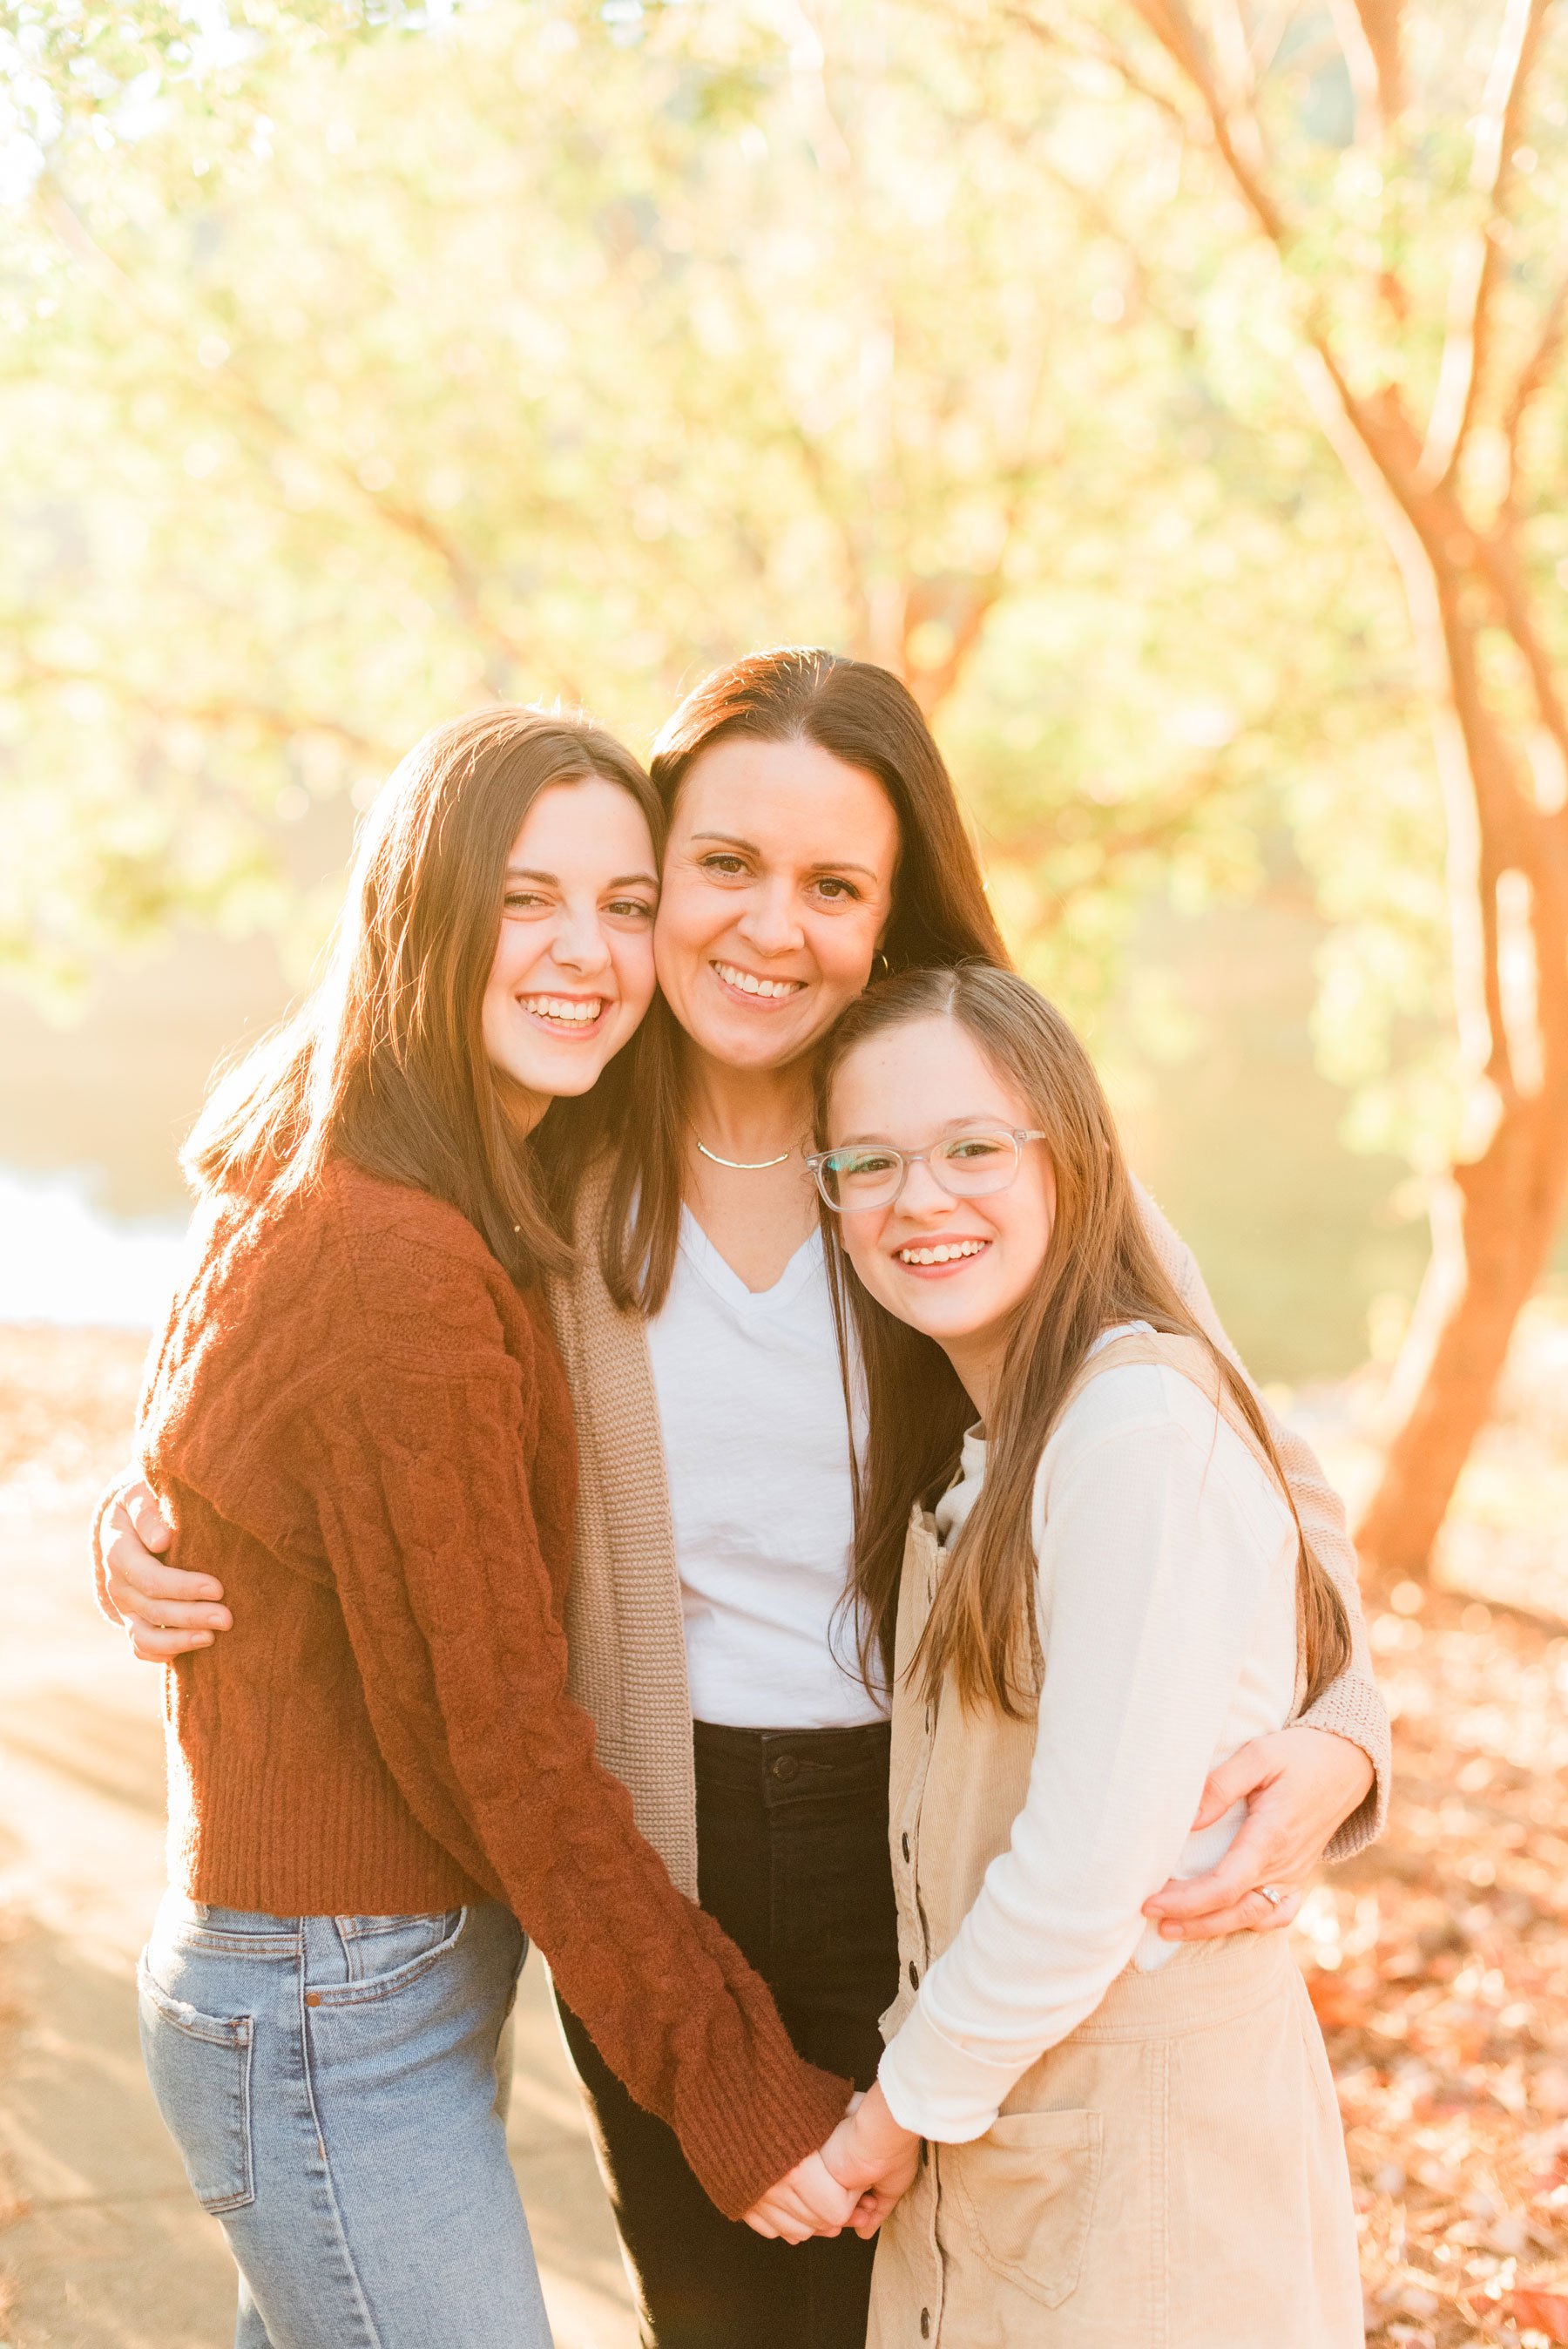  Jacquie Erickson Photography shares how moms deserve to be part of the picture, not just the ones holding the camera.&nbsp; #JacquieEricksonPhotography #MoreThanProofOfMom #AtlantaFamilyPhotographer #MariettaFamilyPhotographer 